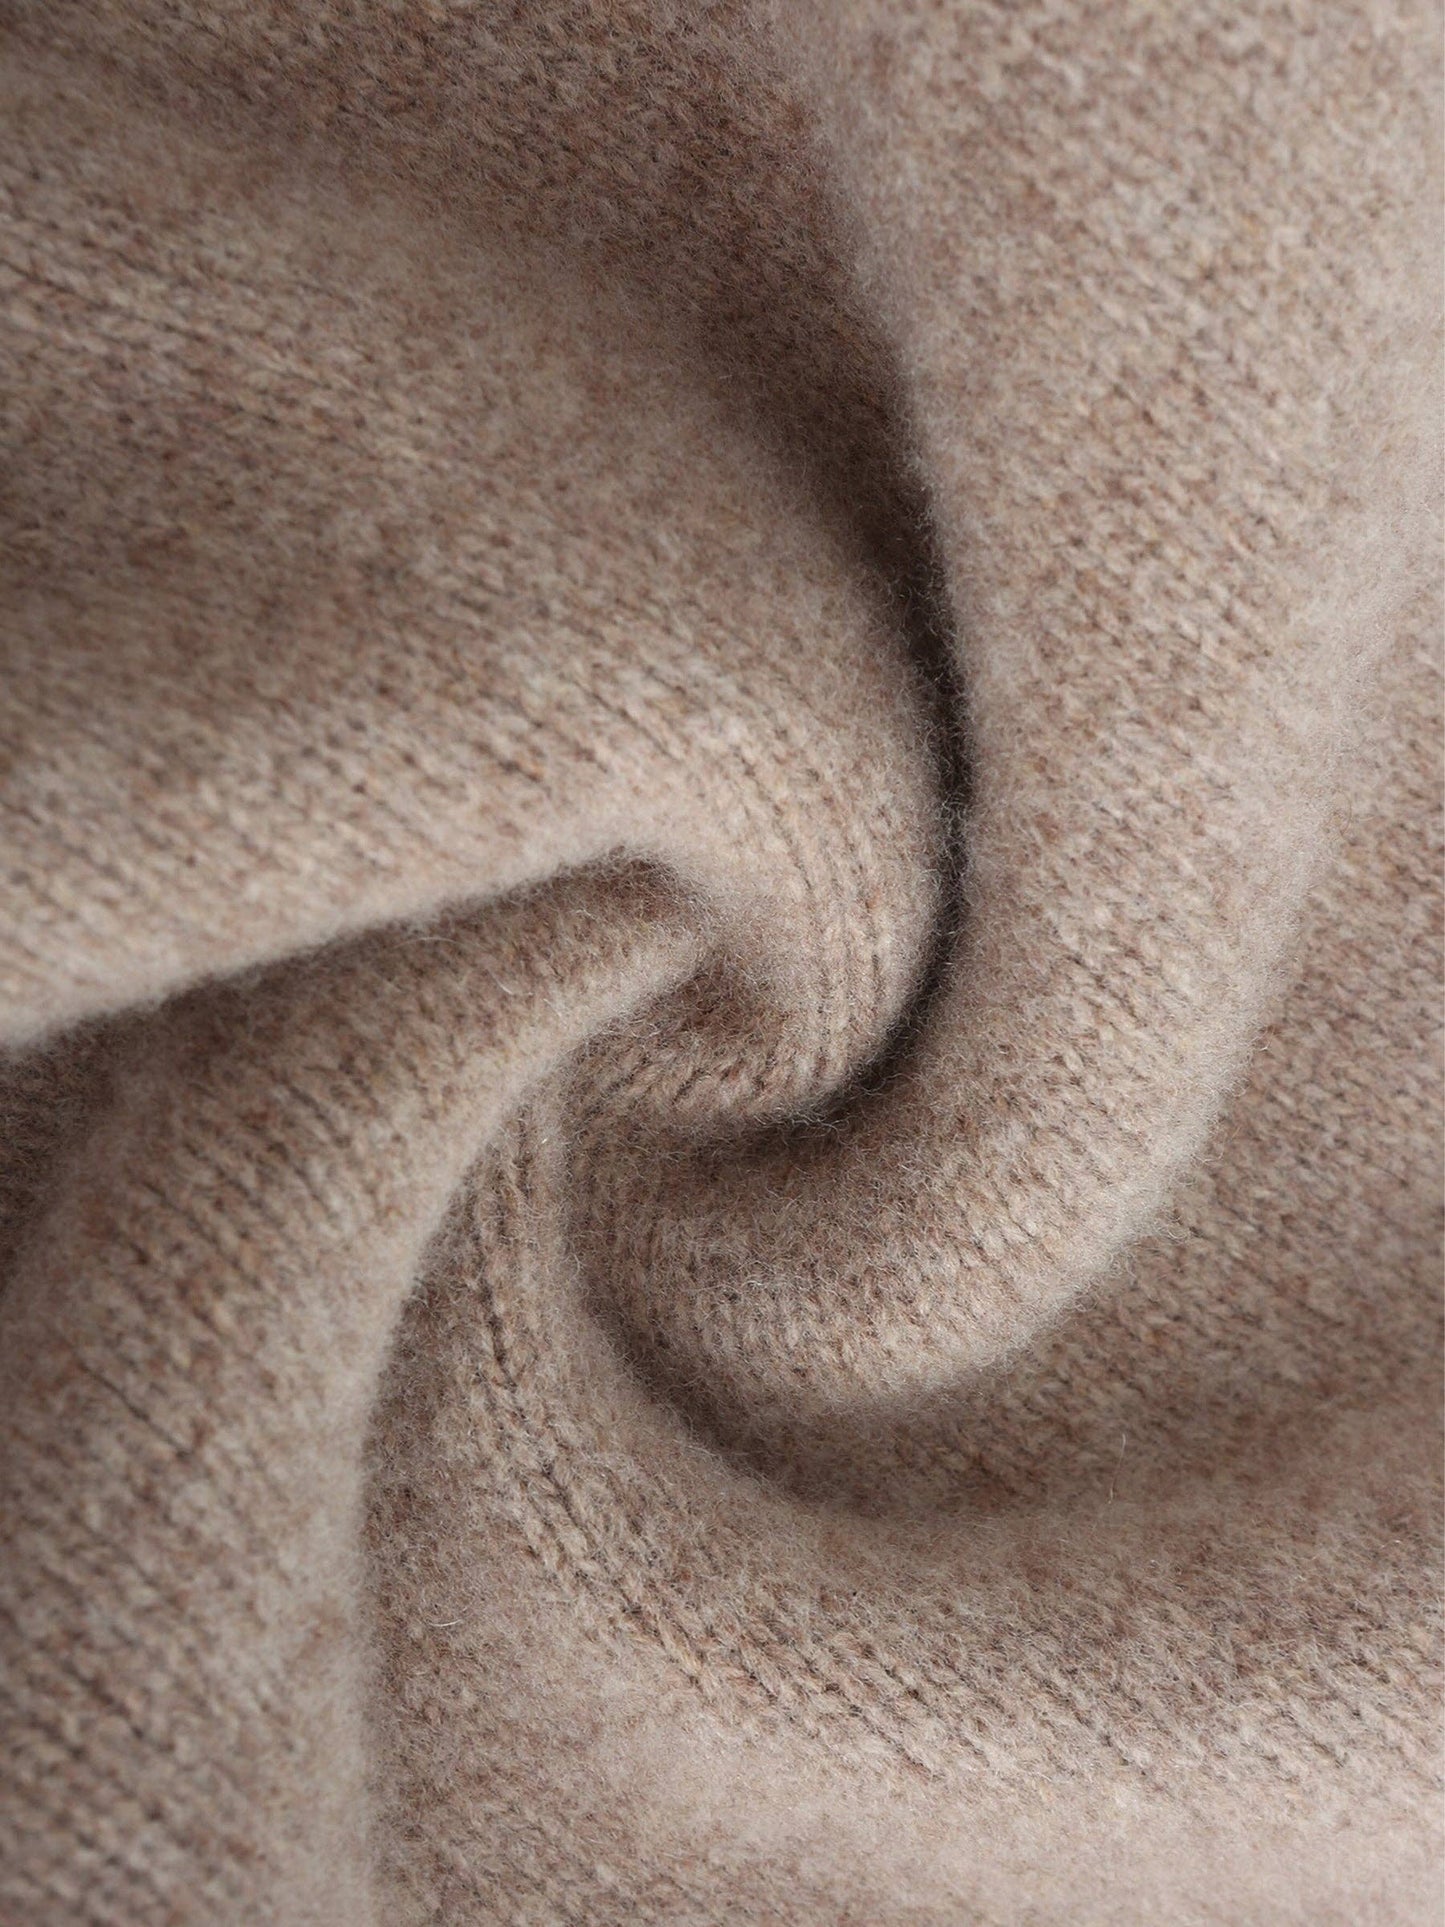 CUBIC - High Neck Sheep 100% Wool Sweater